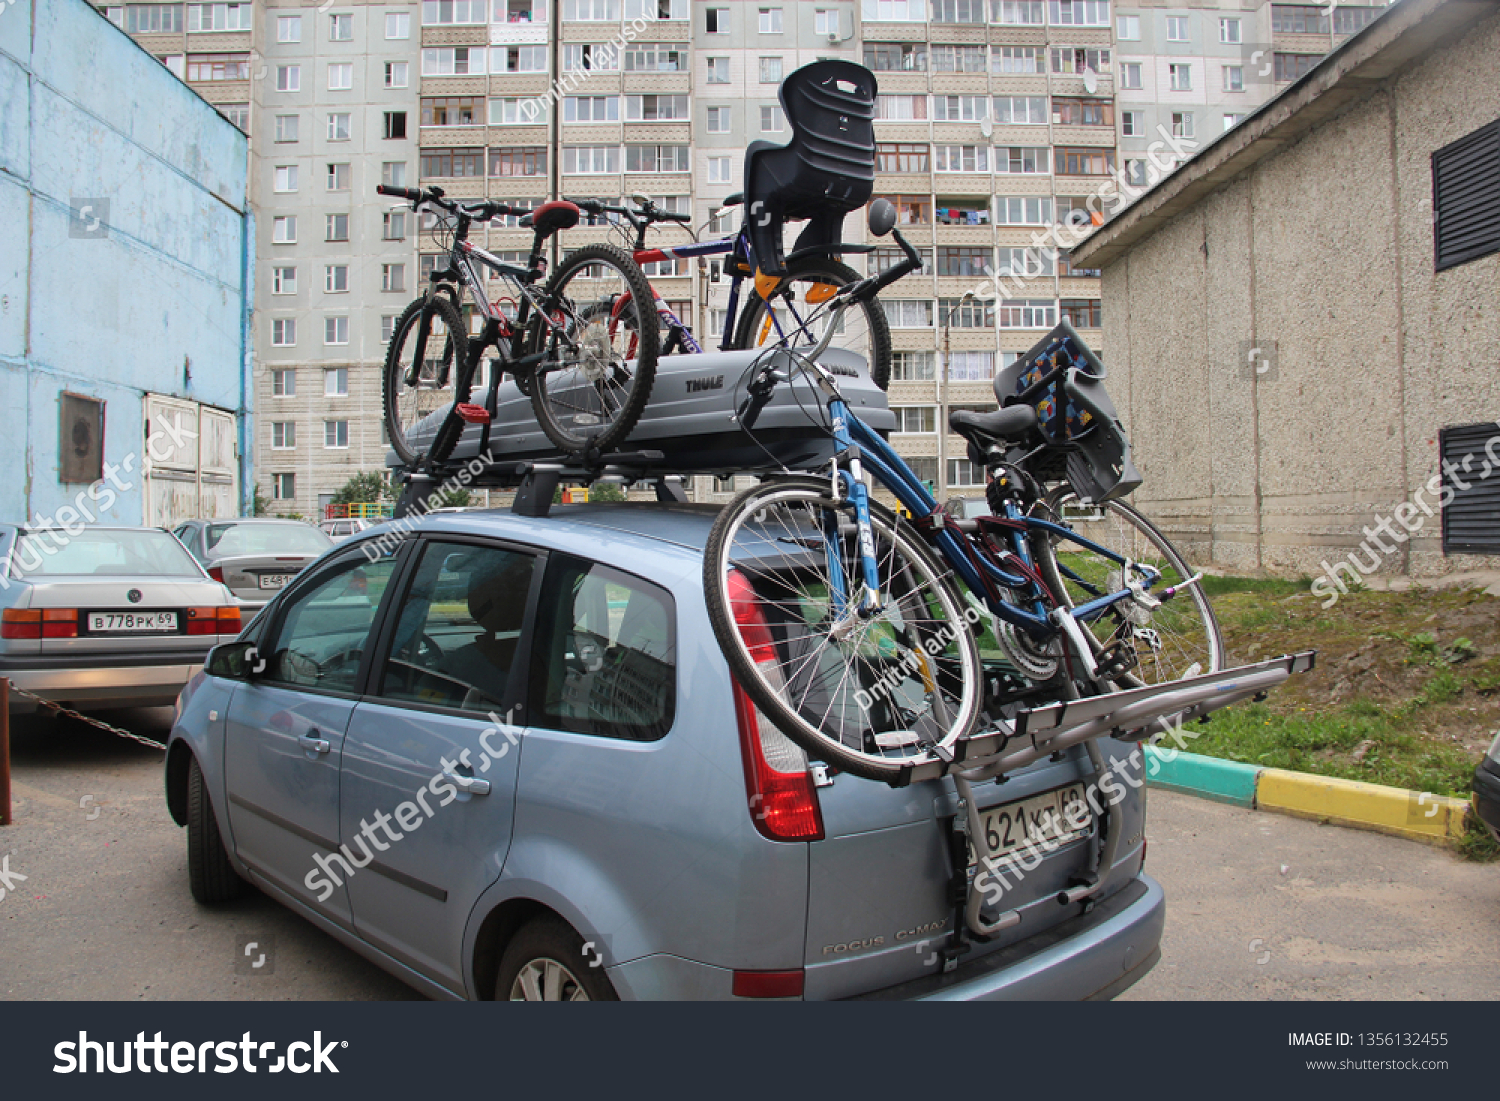 Ccar Bikes Roof Rack Ford Focus Stock Photo Edit Now 1356132455